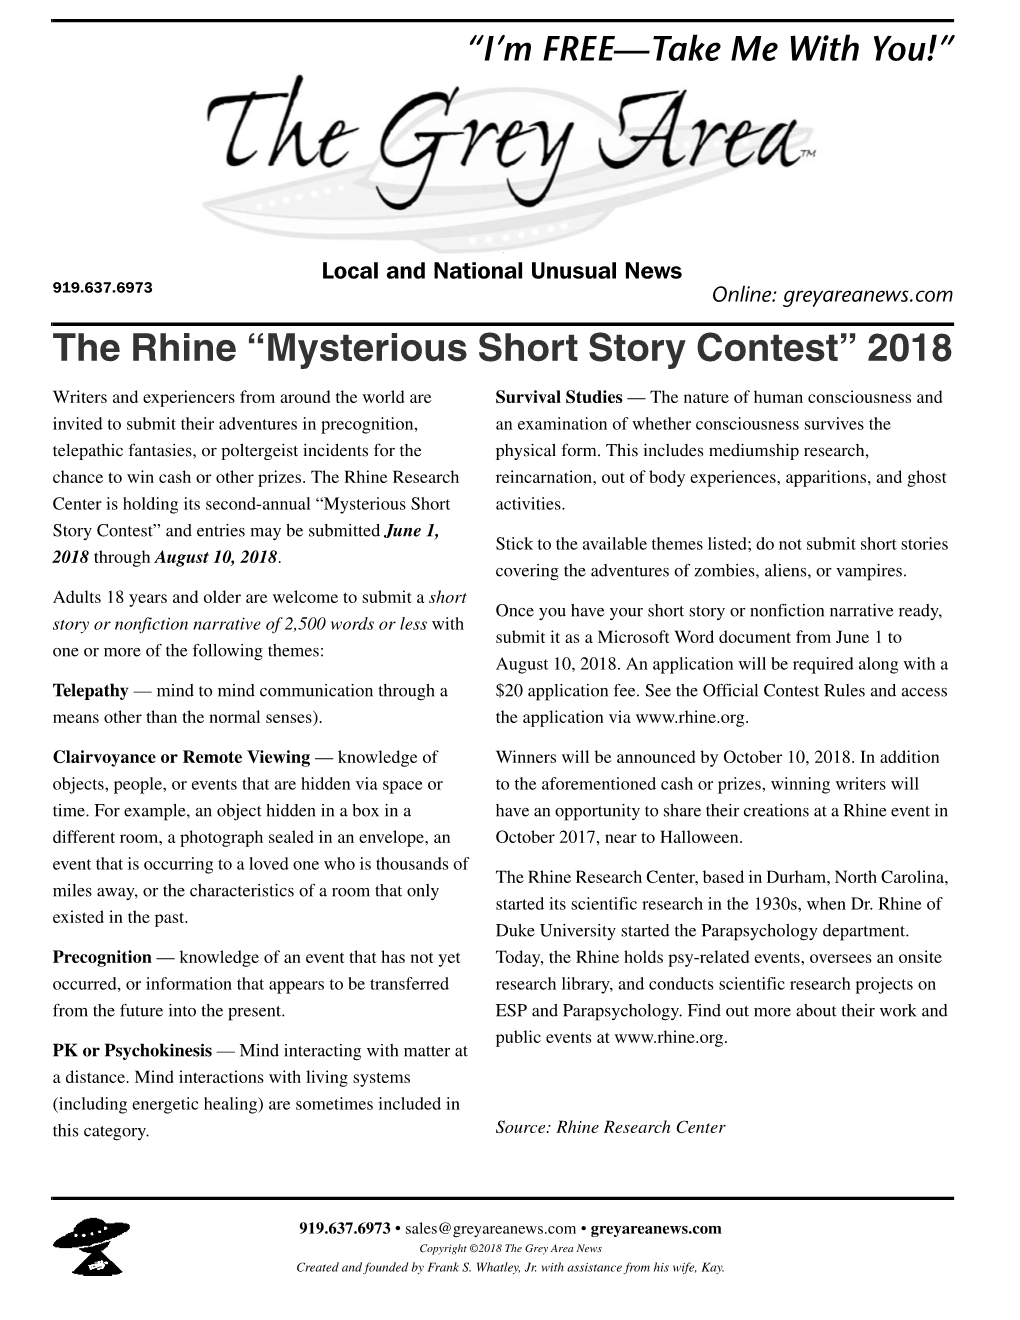 Handout 3. the Rhine Mysterious Short Story Contest 2018